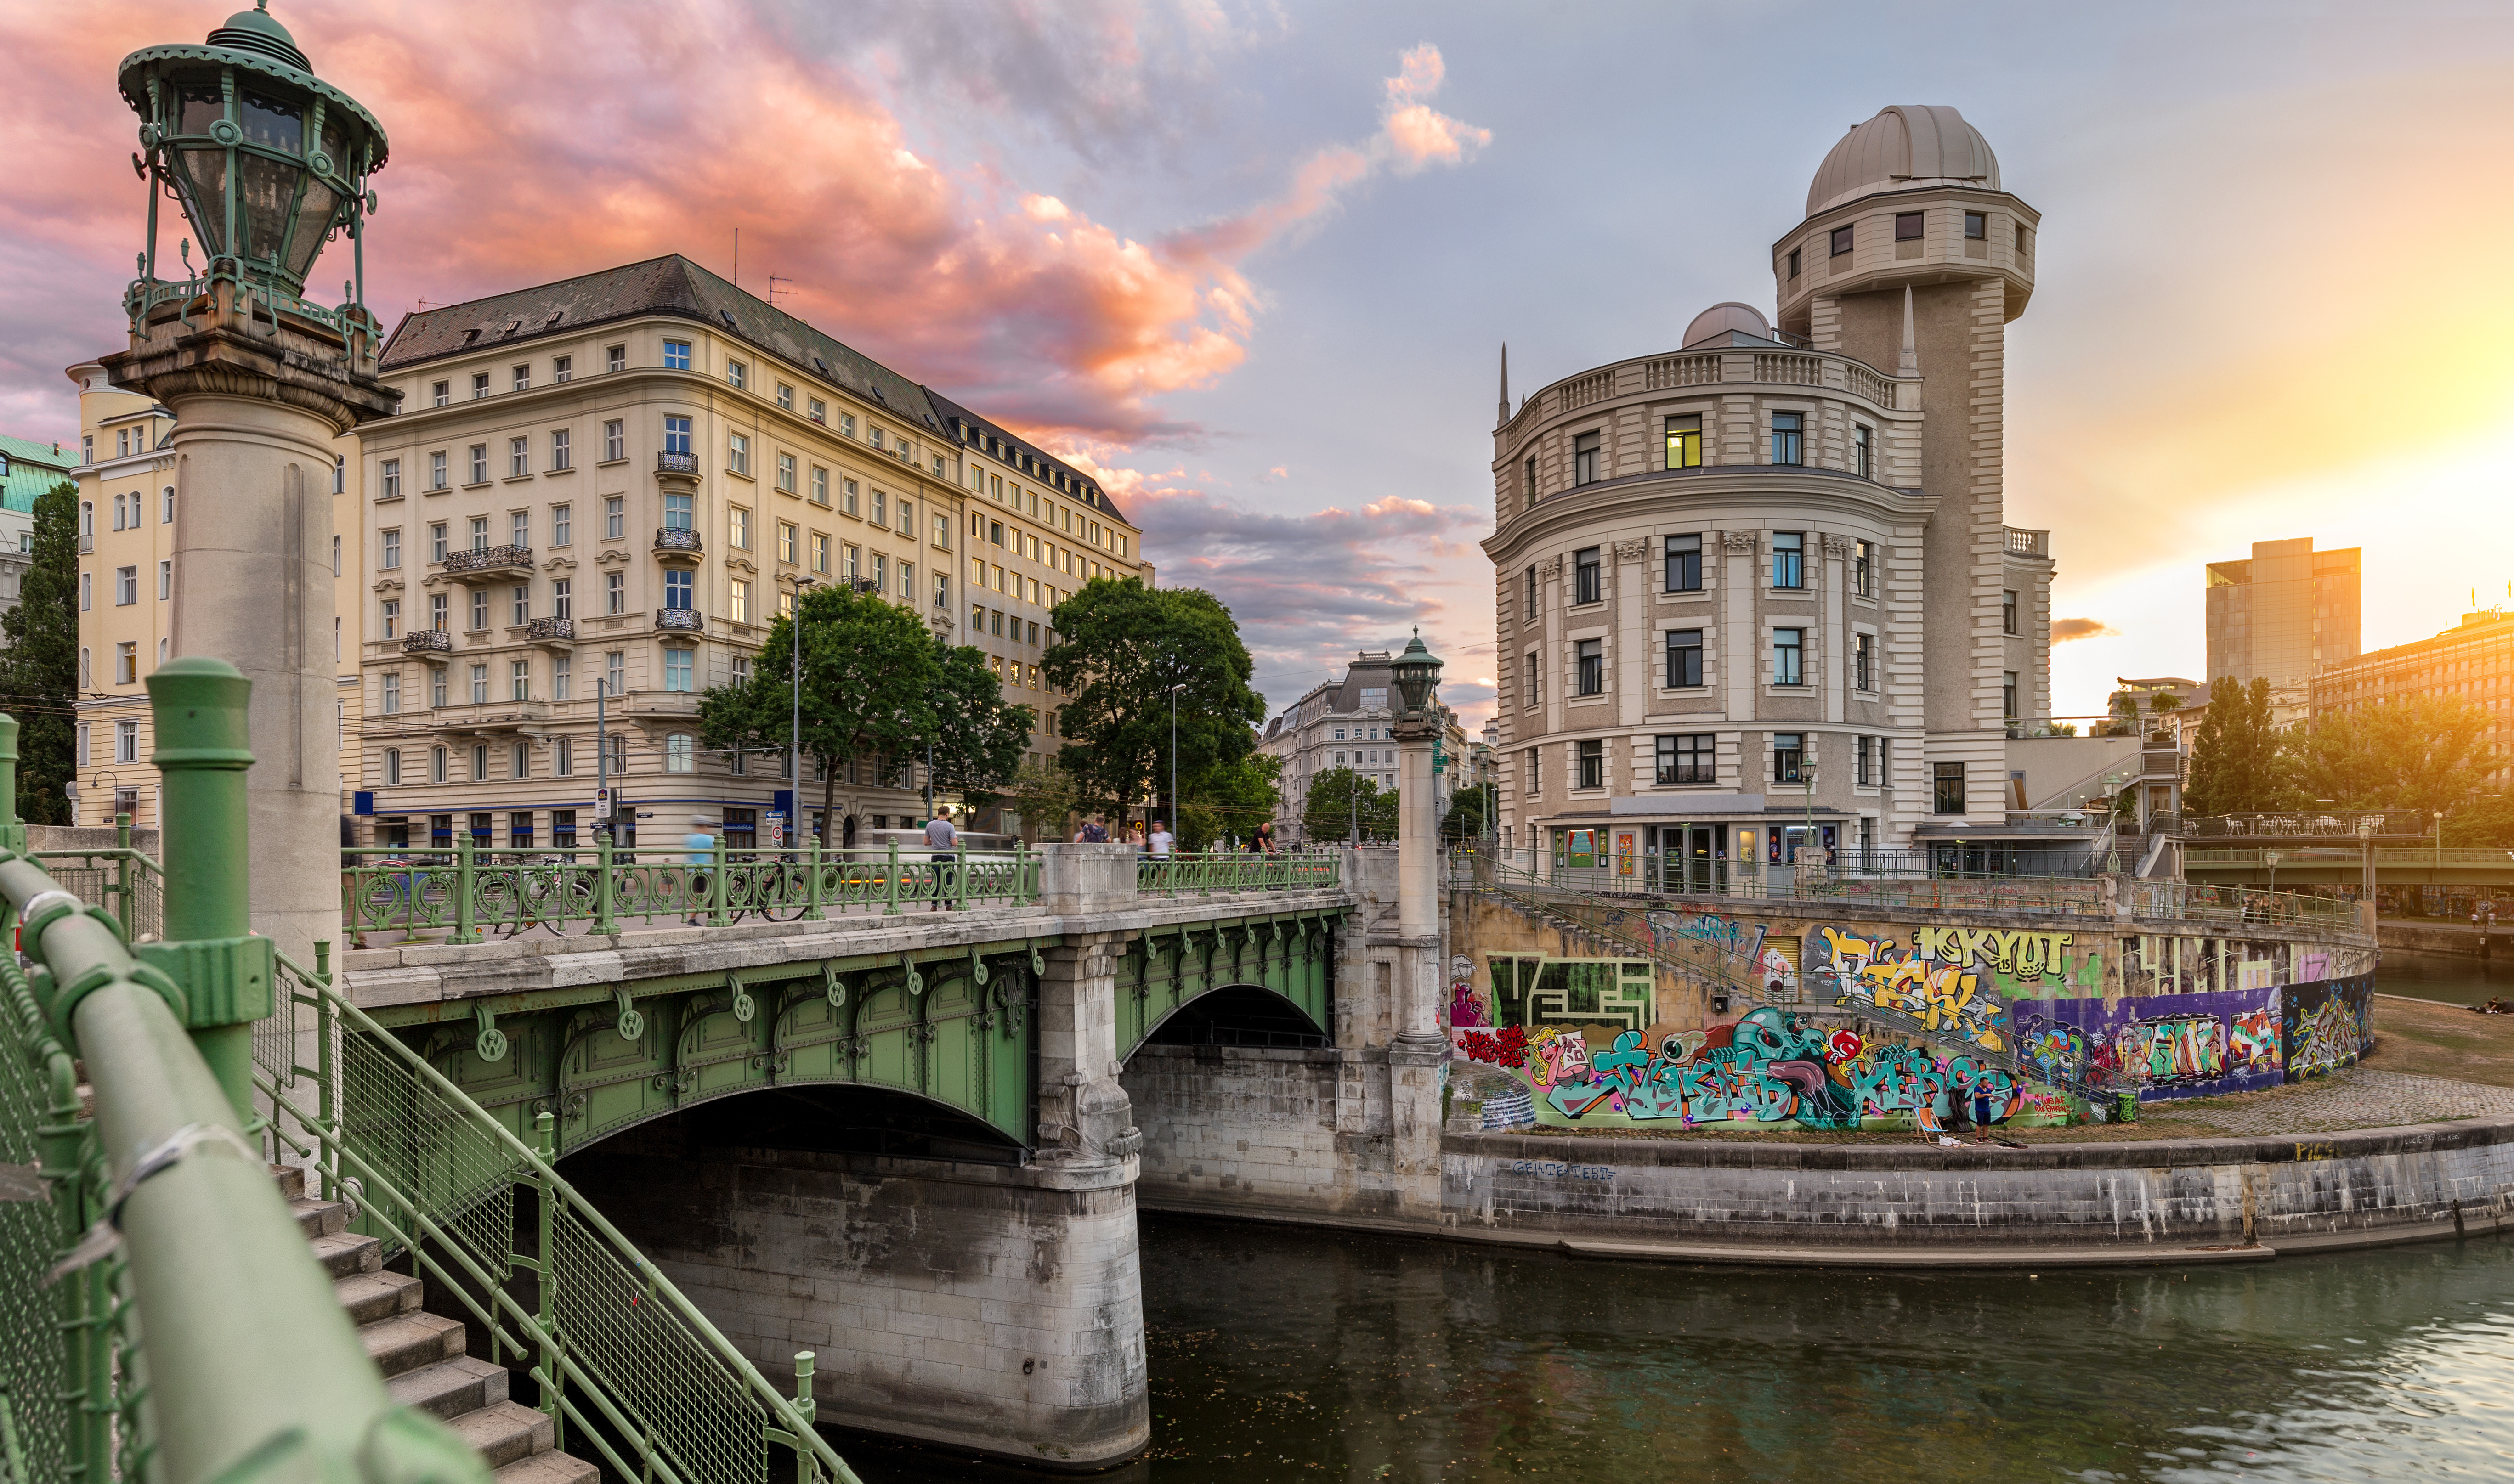 33 things to see and do in Vienna